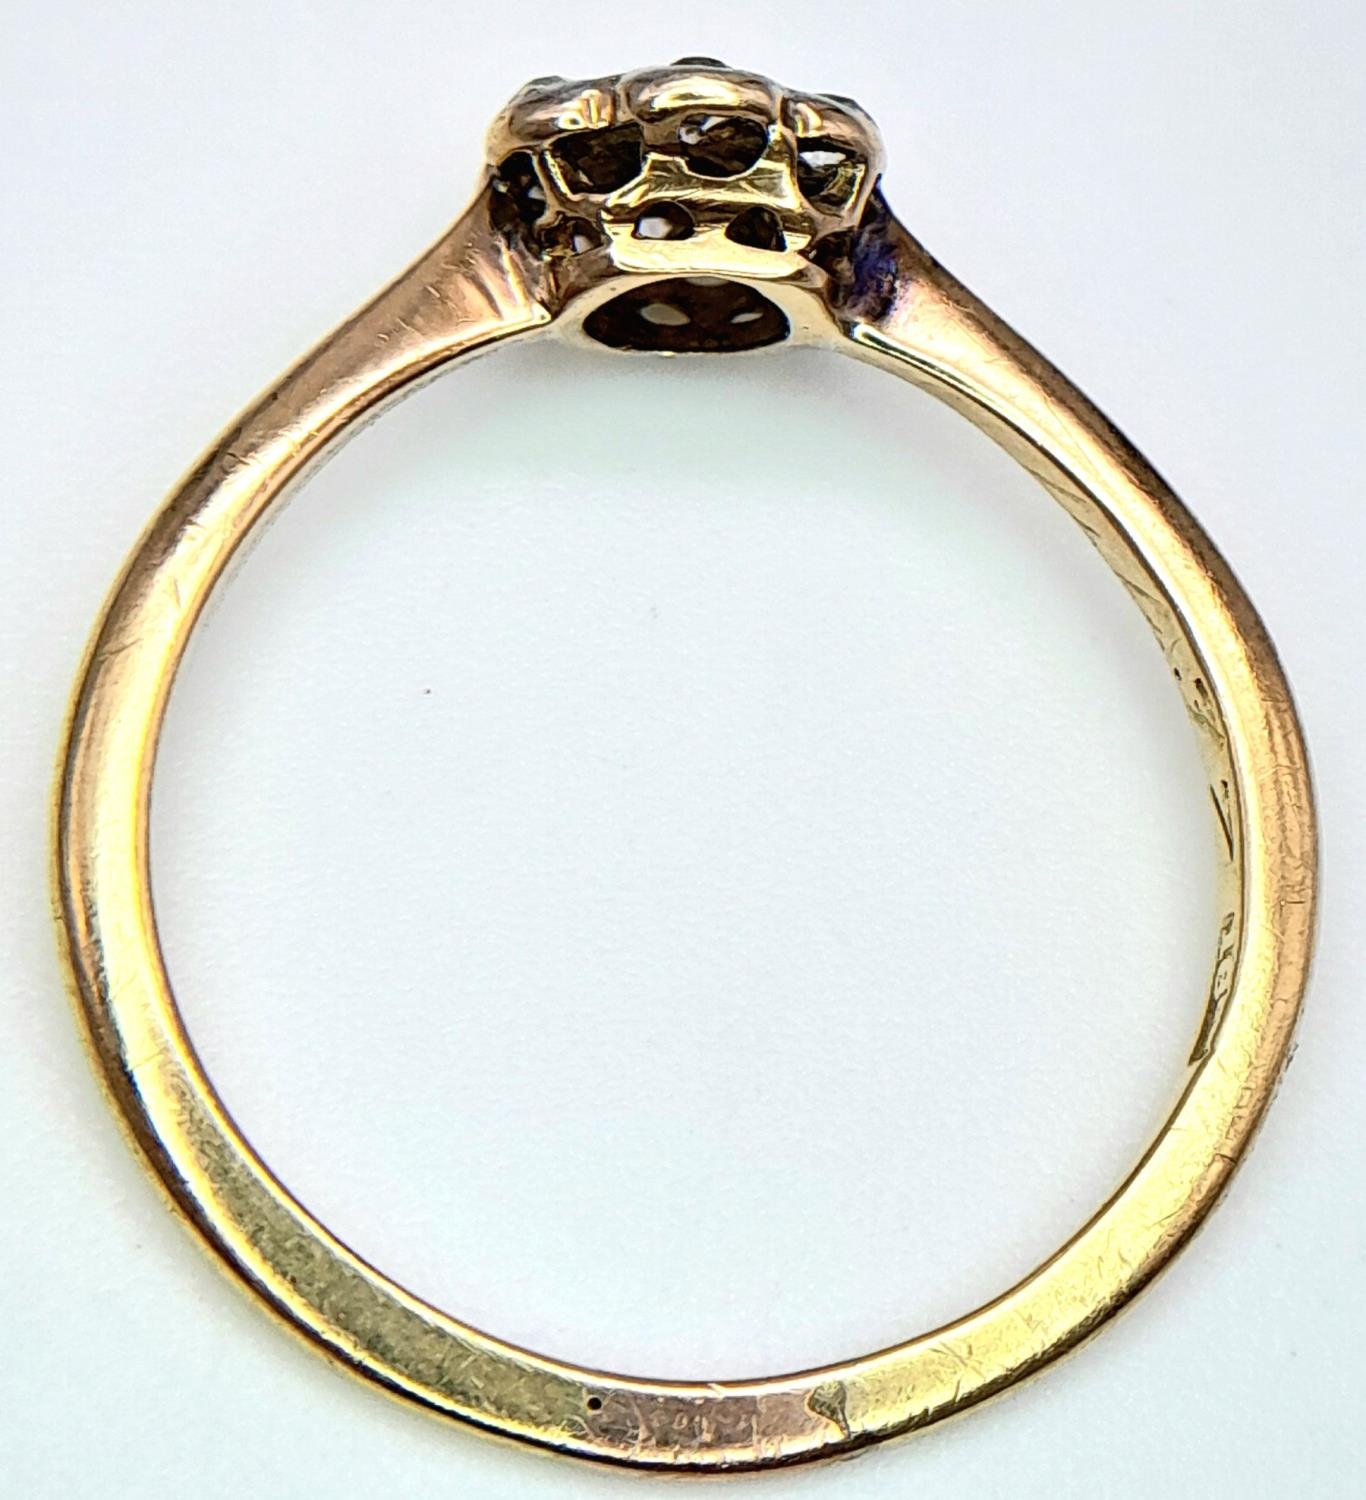 An Antique 18K Yellow Gold Old Cut Diamond Cluster Ring. Size N, 2.05g total weight. - Image 4 of 5